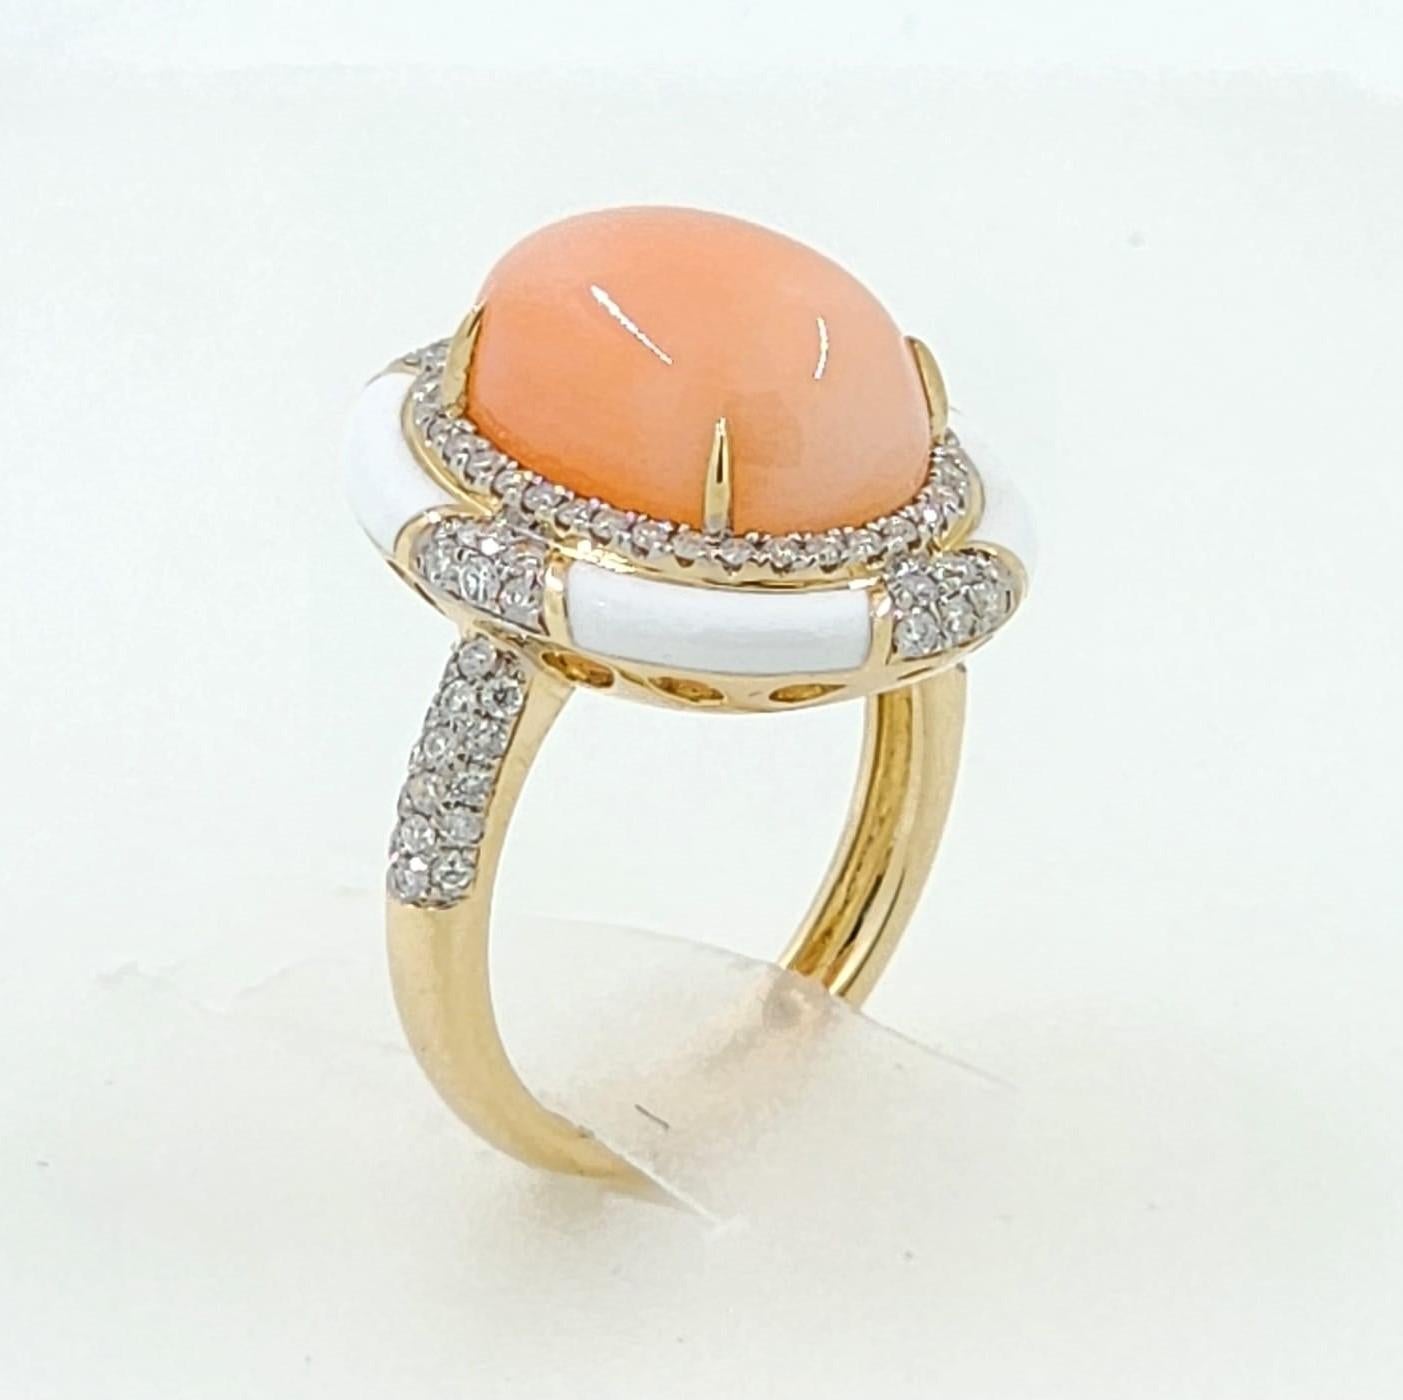 Contemporary Angle Skin Color Coral Diamond Enamel Ring in 14 Karat Yellow Gold